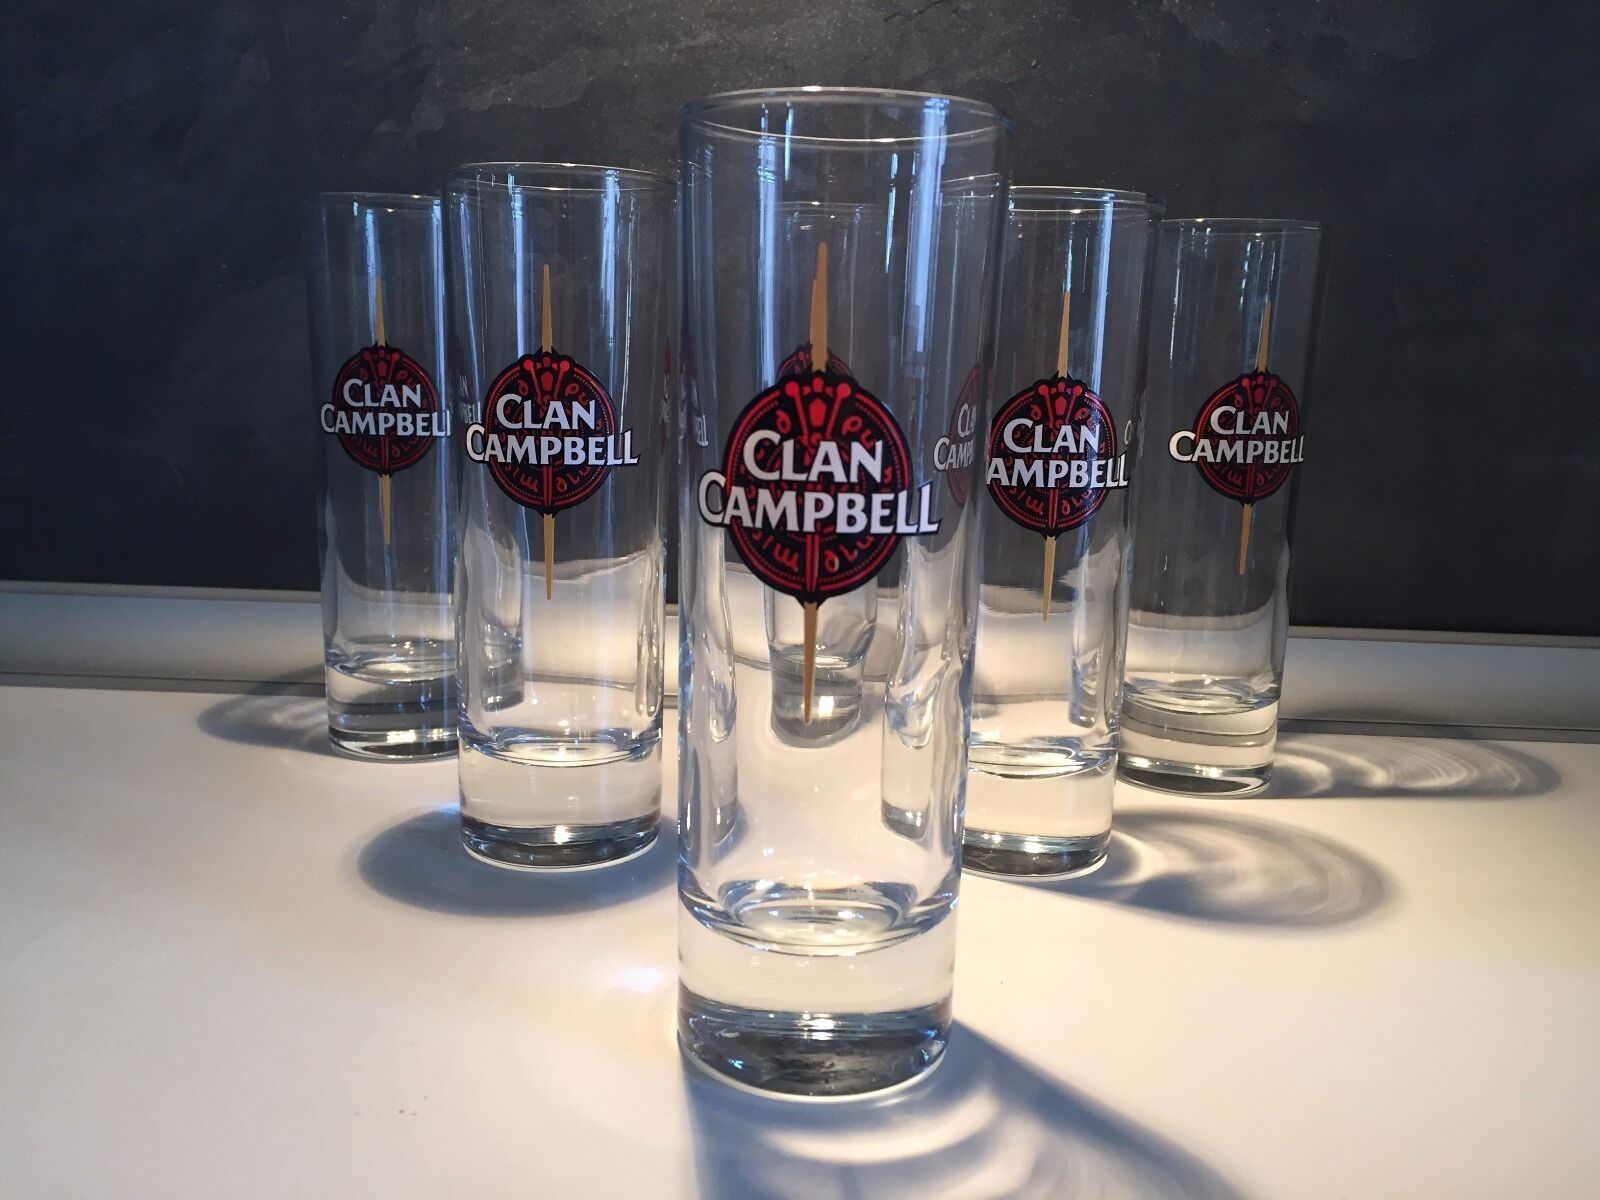 6 VERRES MOMIES  A WHISKY CLAN CAMPBELL TUBO 11 CL NOUVEAU MODEL NEUFS !!!